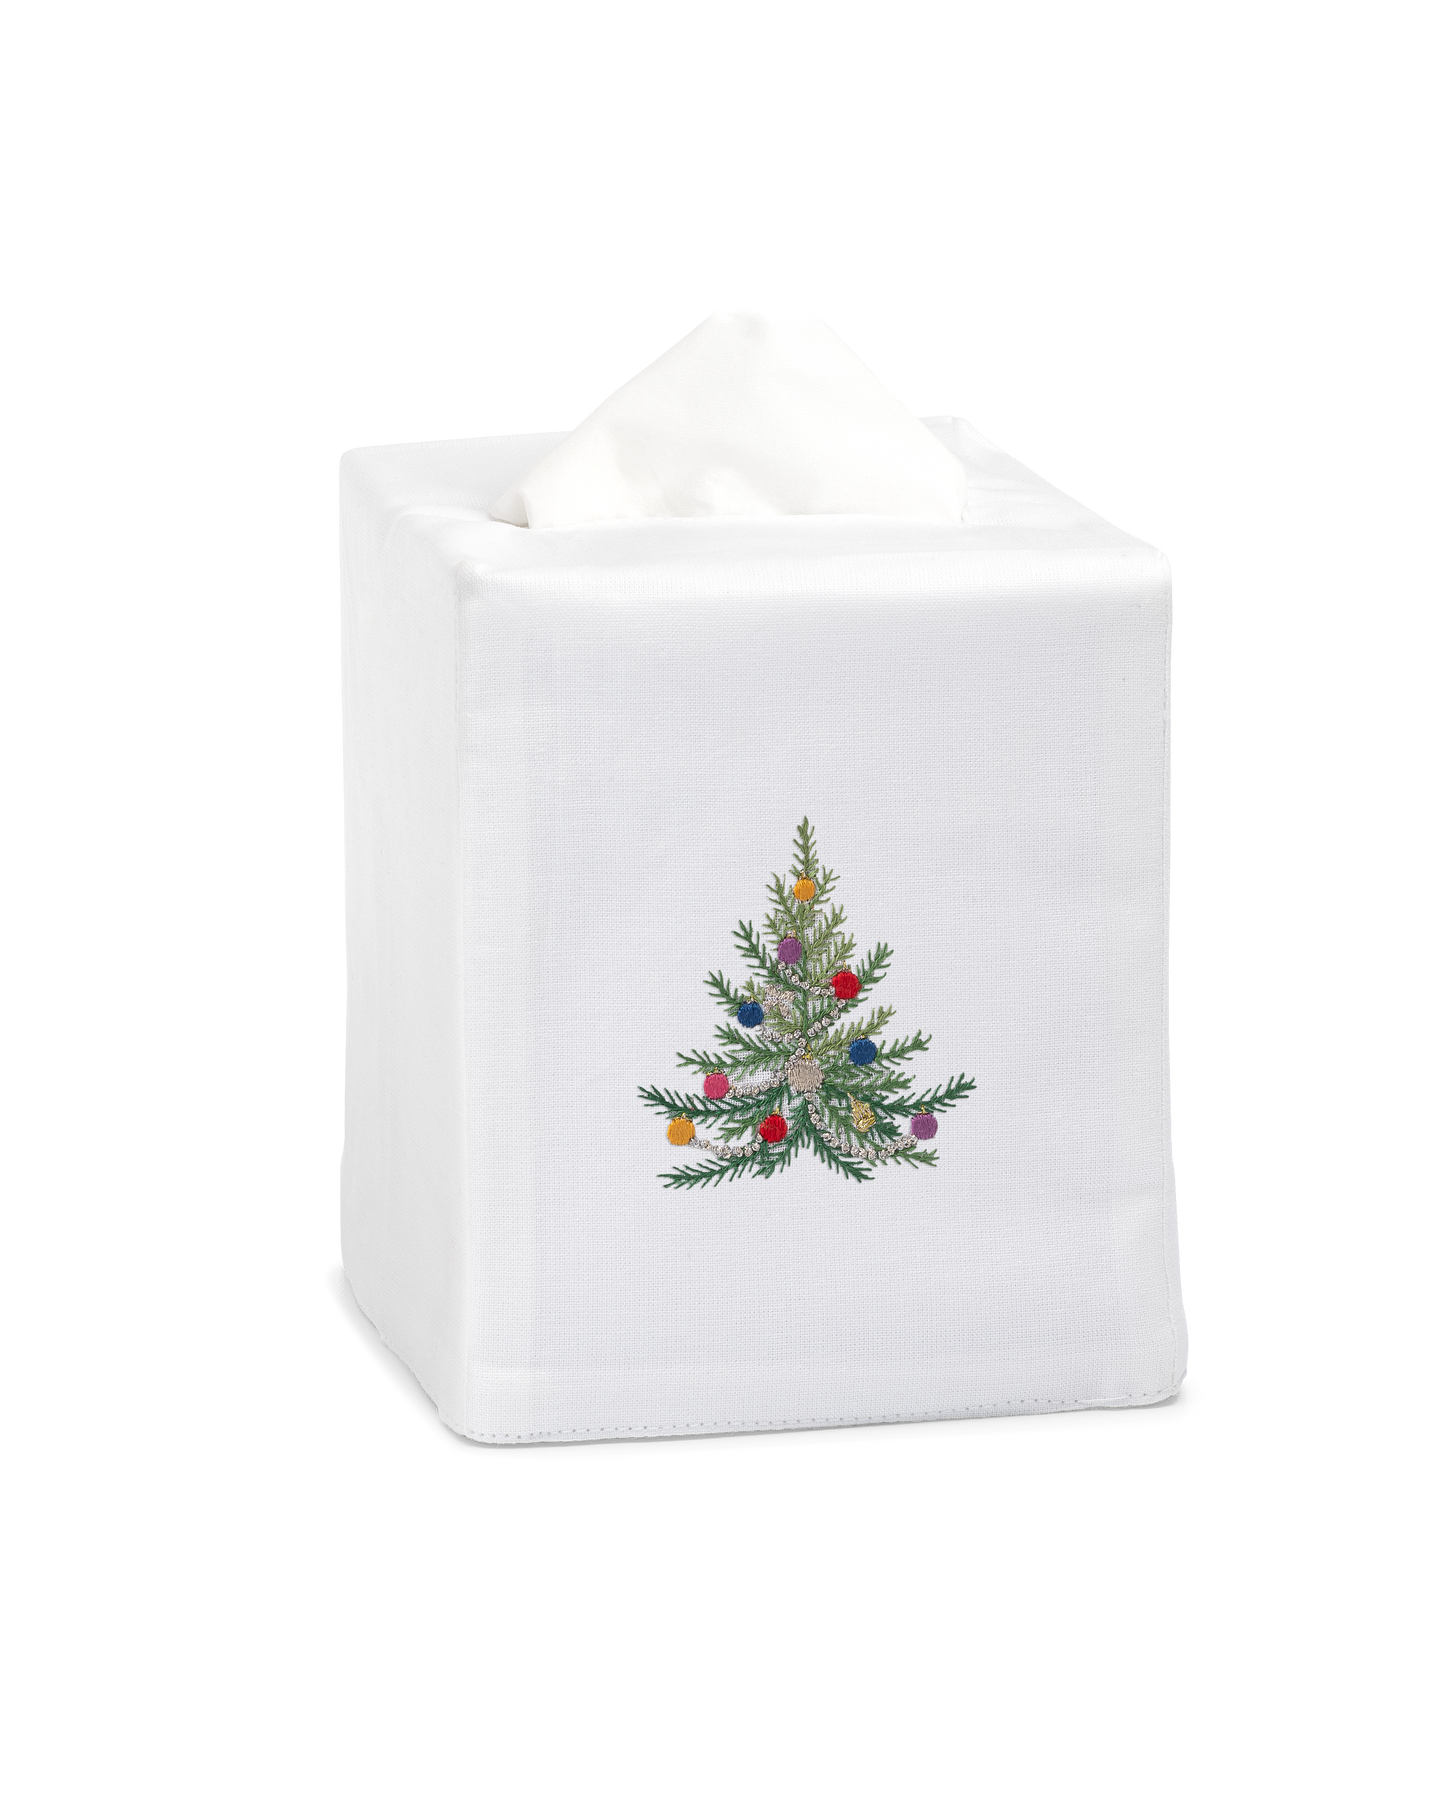 A white tissue cover with a green christmas tree with glittery ornaments in the center.